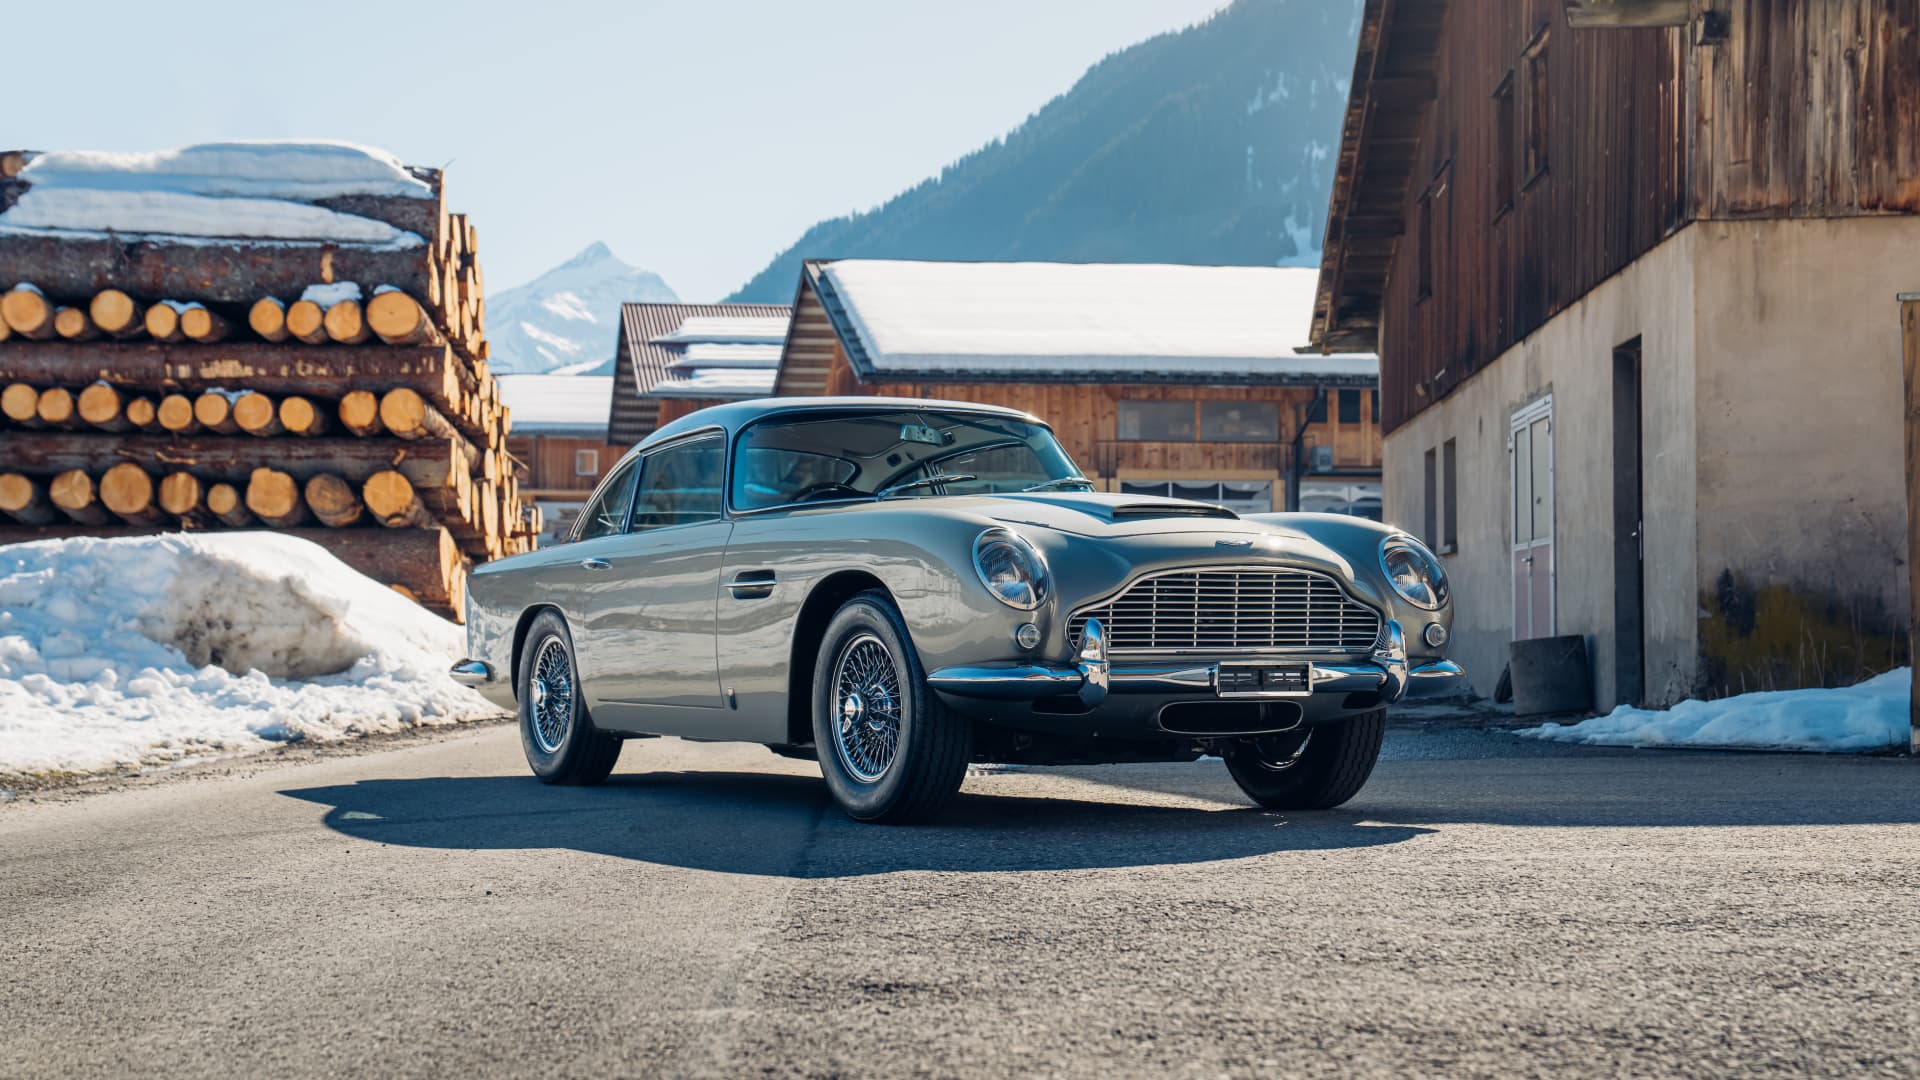 Sean Connery’s ‘James Bond’ Aston Martin DB5 is up for auction—and it could sell for nearly  million